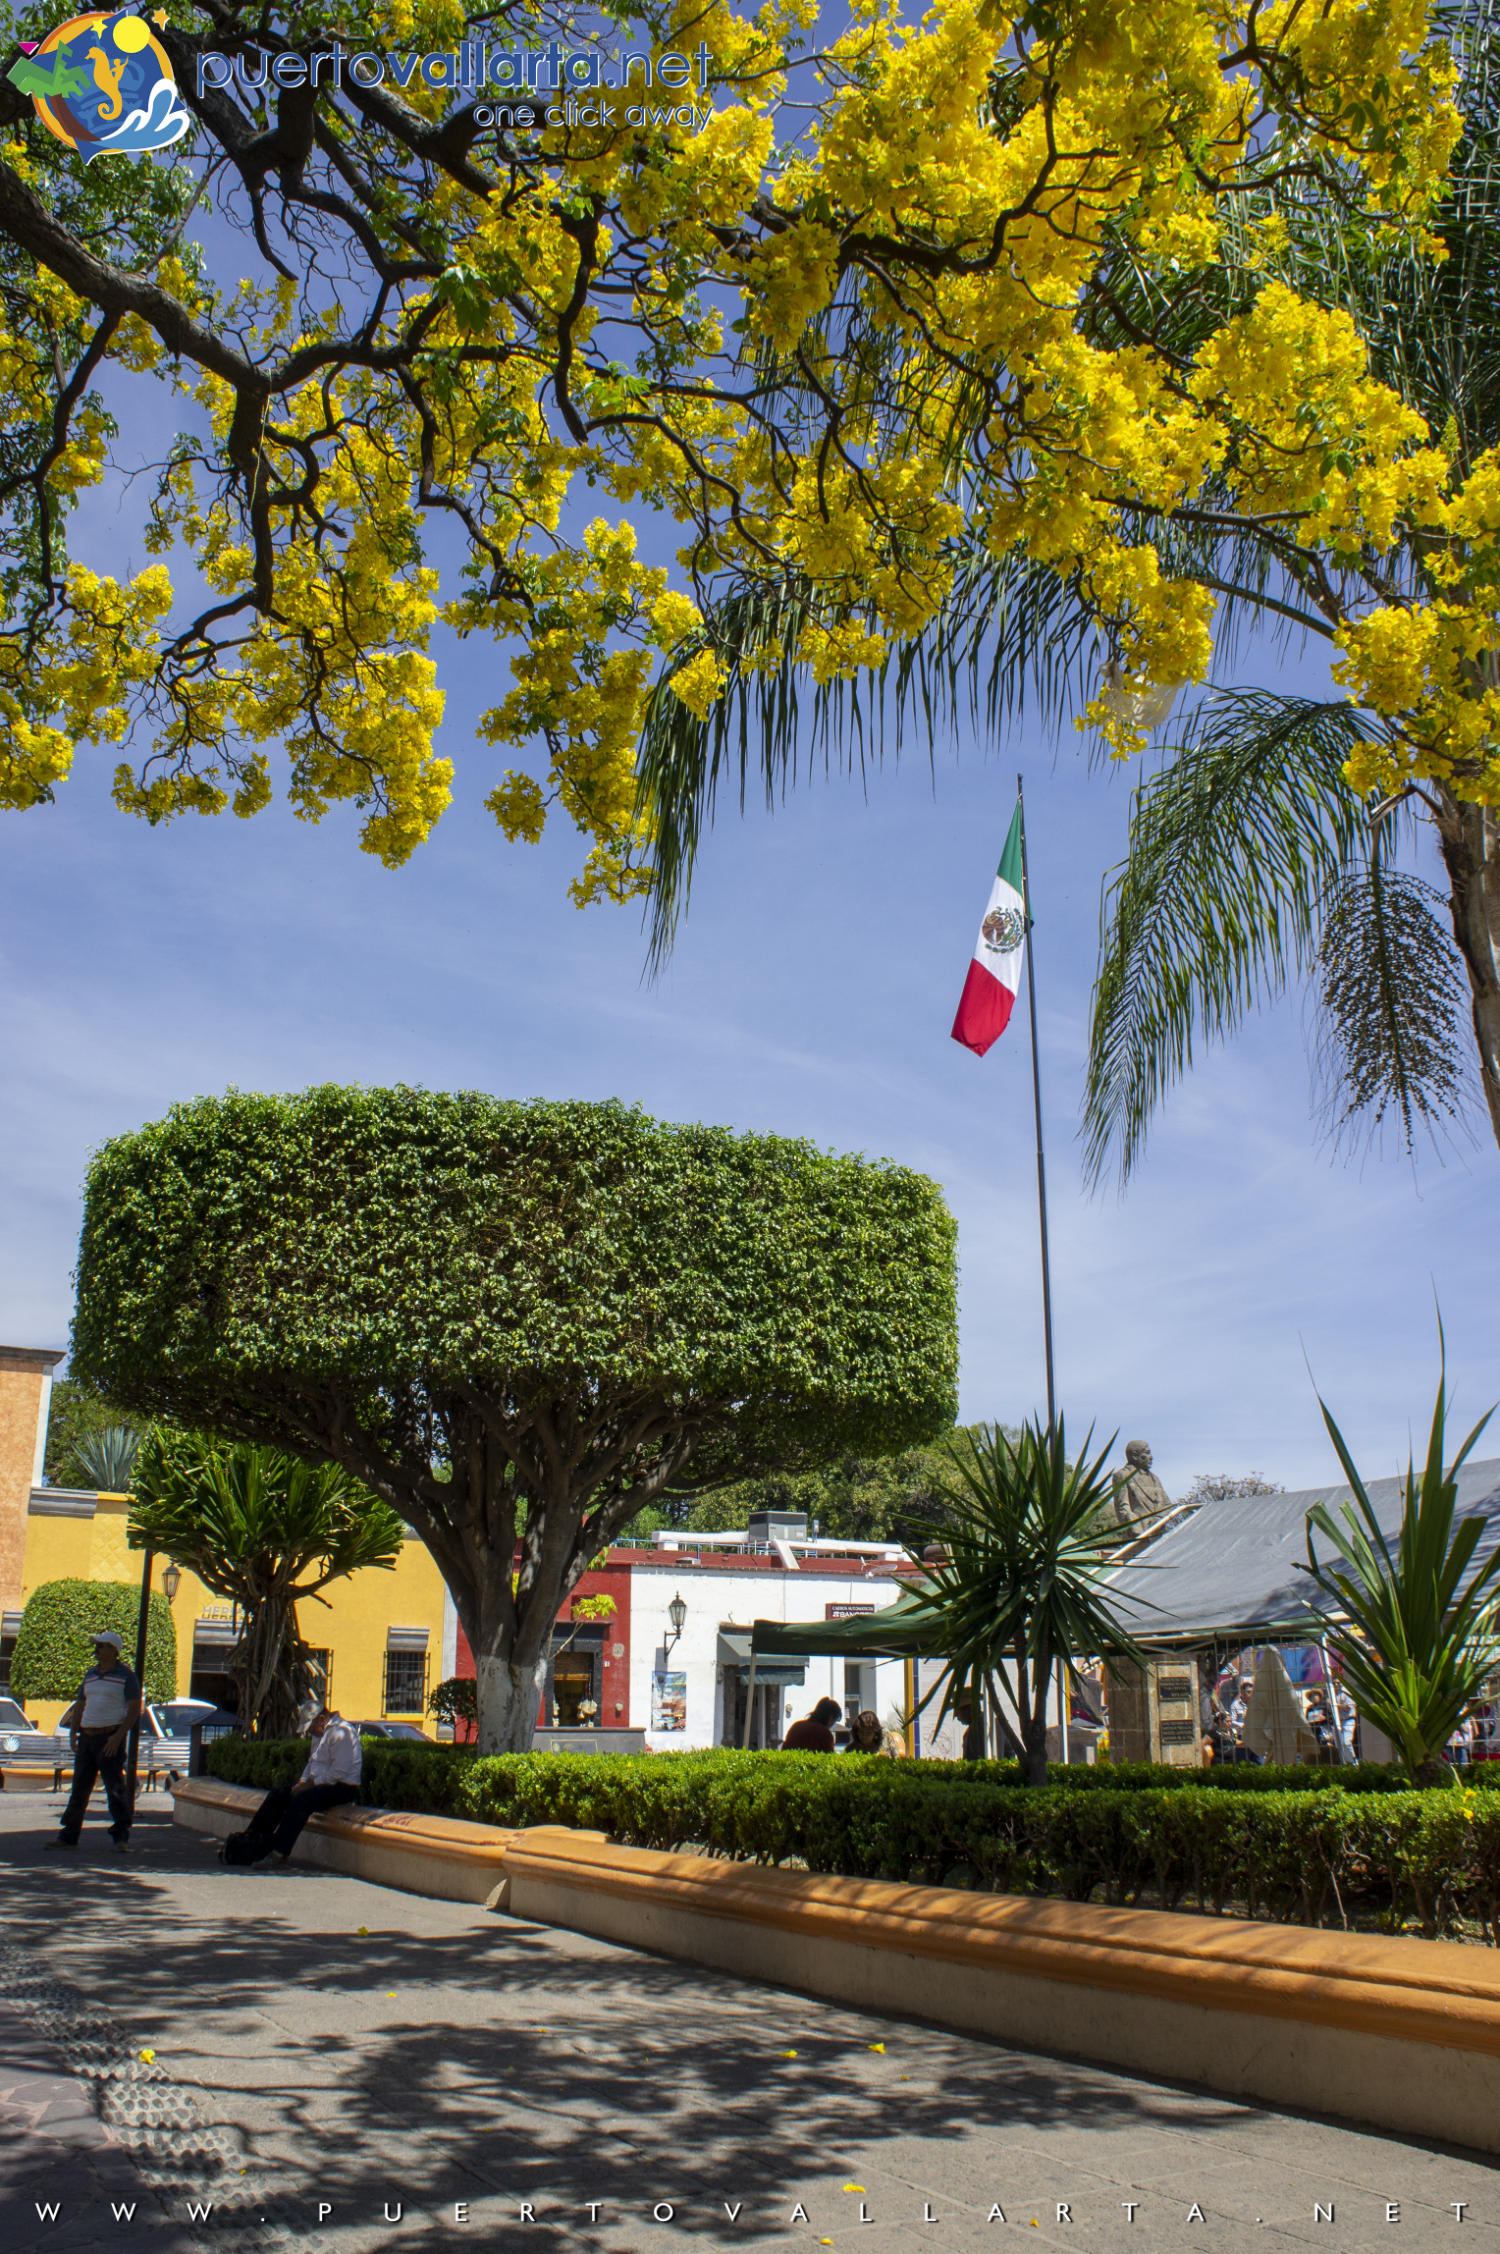 Main Square of Tequila